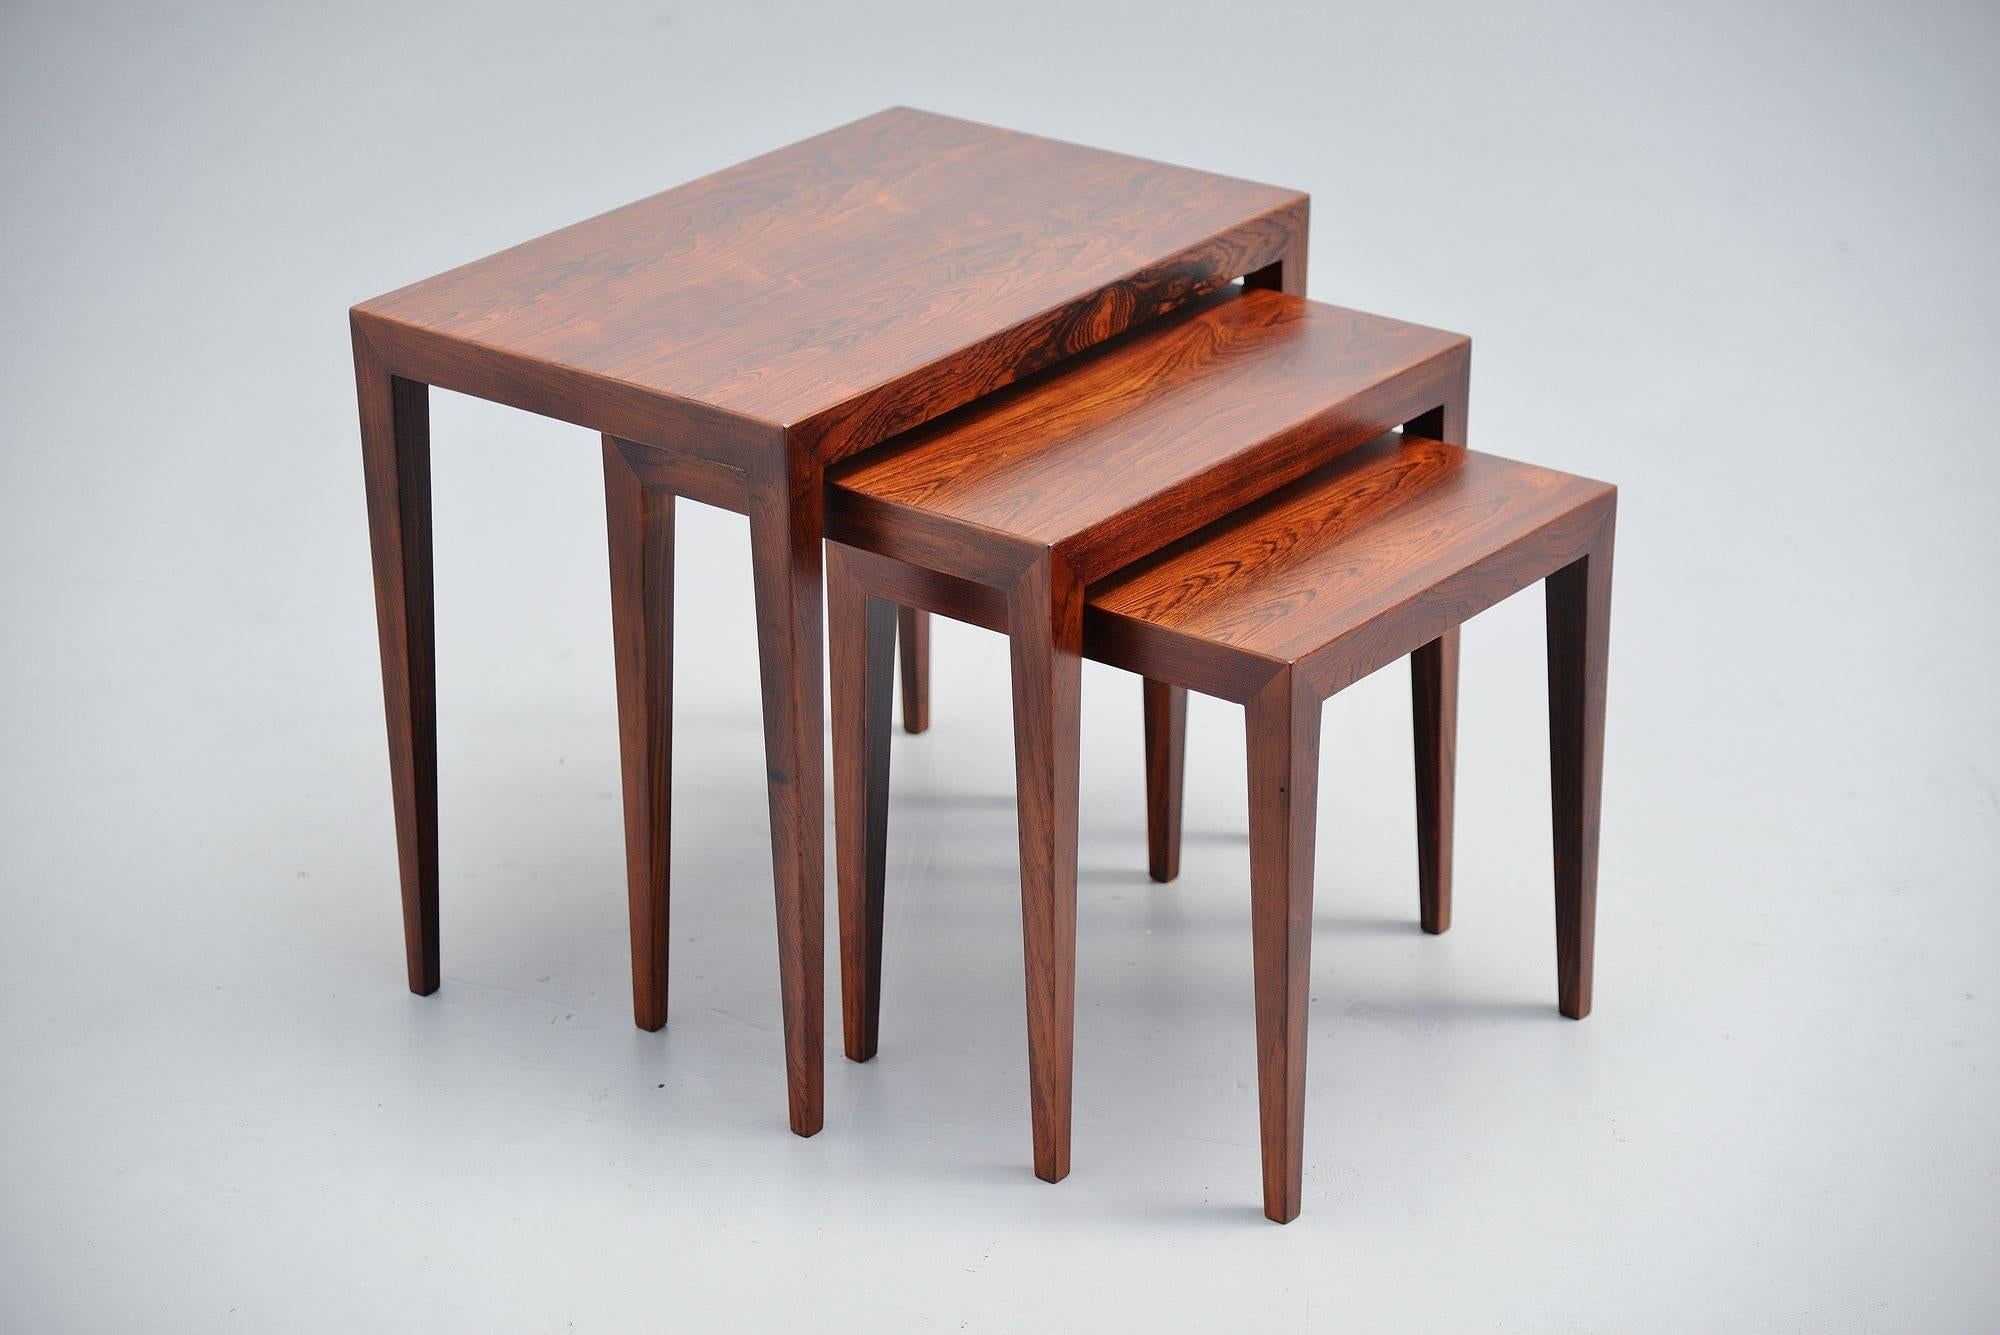 Very nice sophisticated set of nesting tables model 163 designed by Severin Hansen Jr. for Haslev Møbelsnedskeri, Denmark, 1960. This nesting table set is made of very nice grained rosewood veneer and its amazing finished. These tables show quality